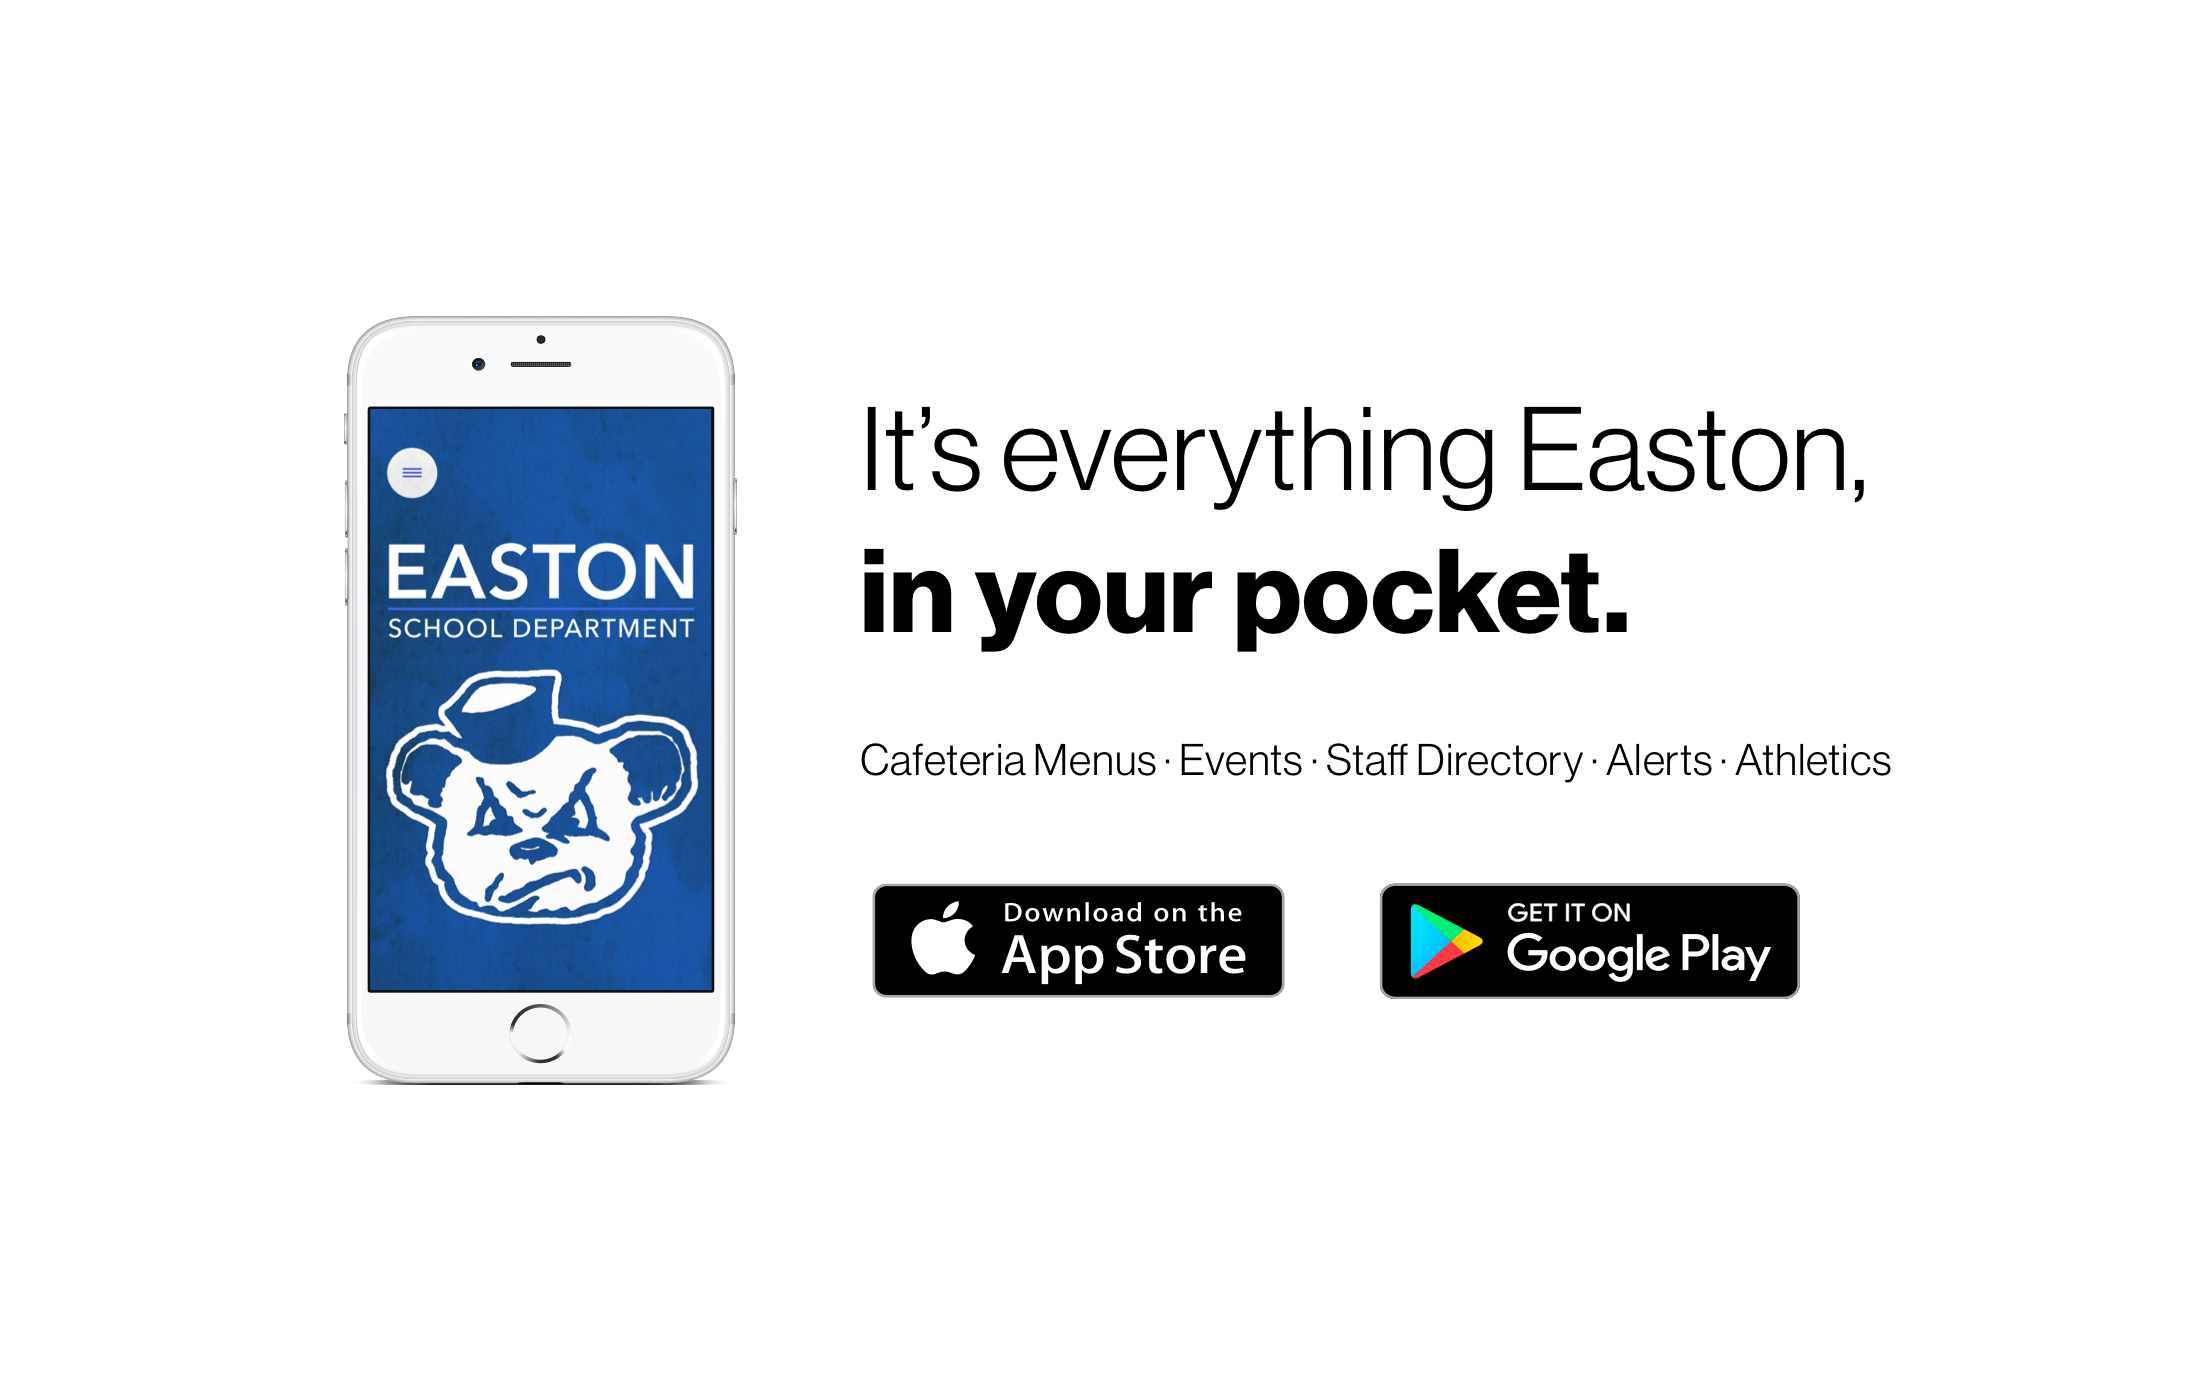 It's everything Easton, in your pocket.